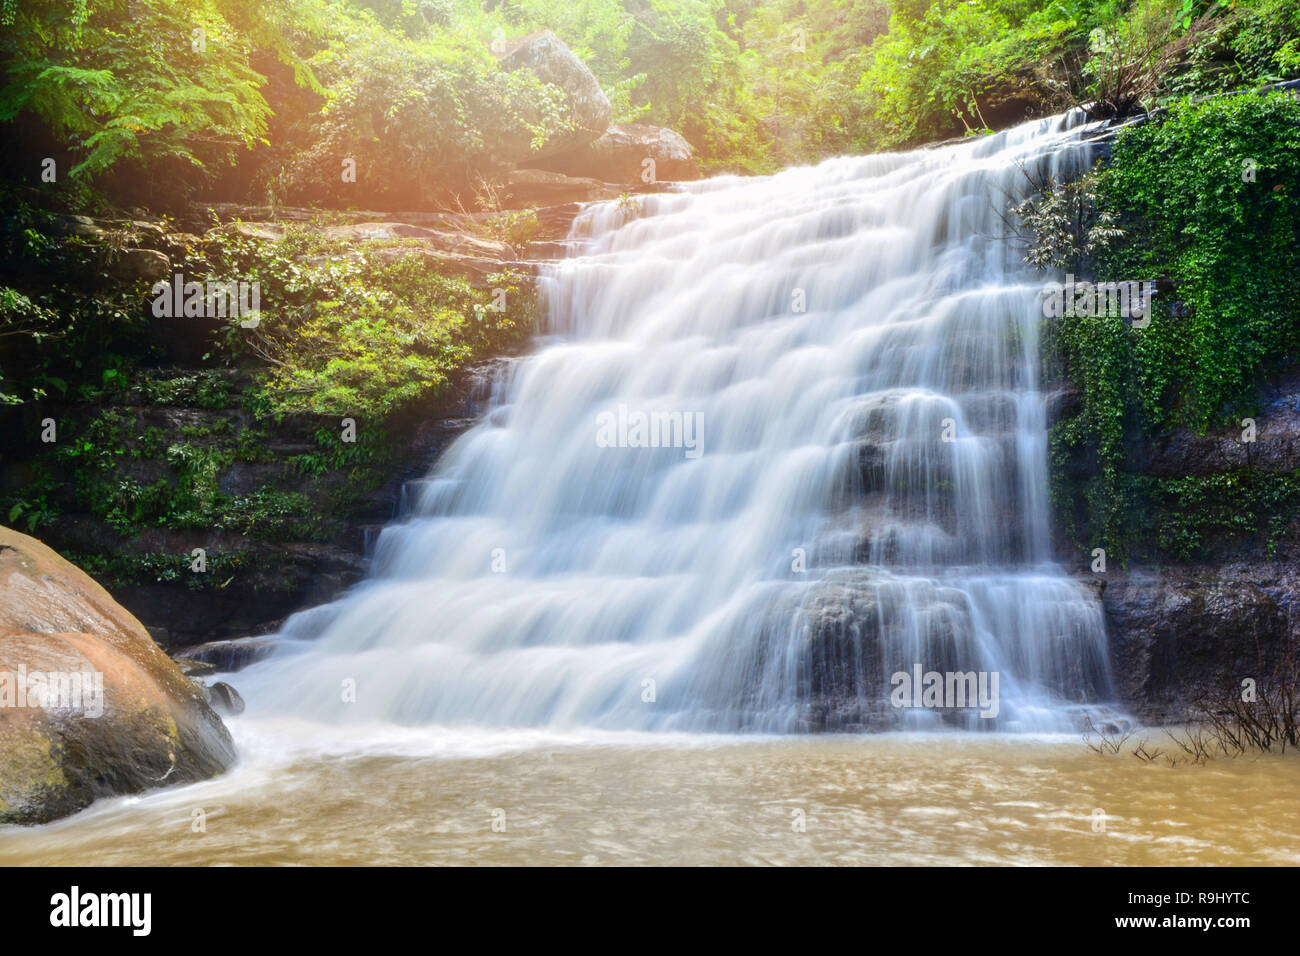 Waterfall in the nature rain jungle forest in the rainy season / Waterfall at Loei Thailand Stock Photo